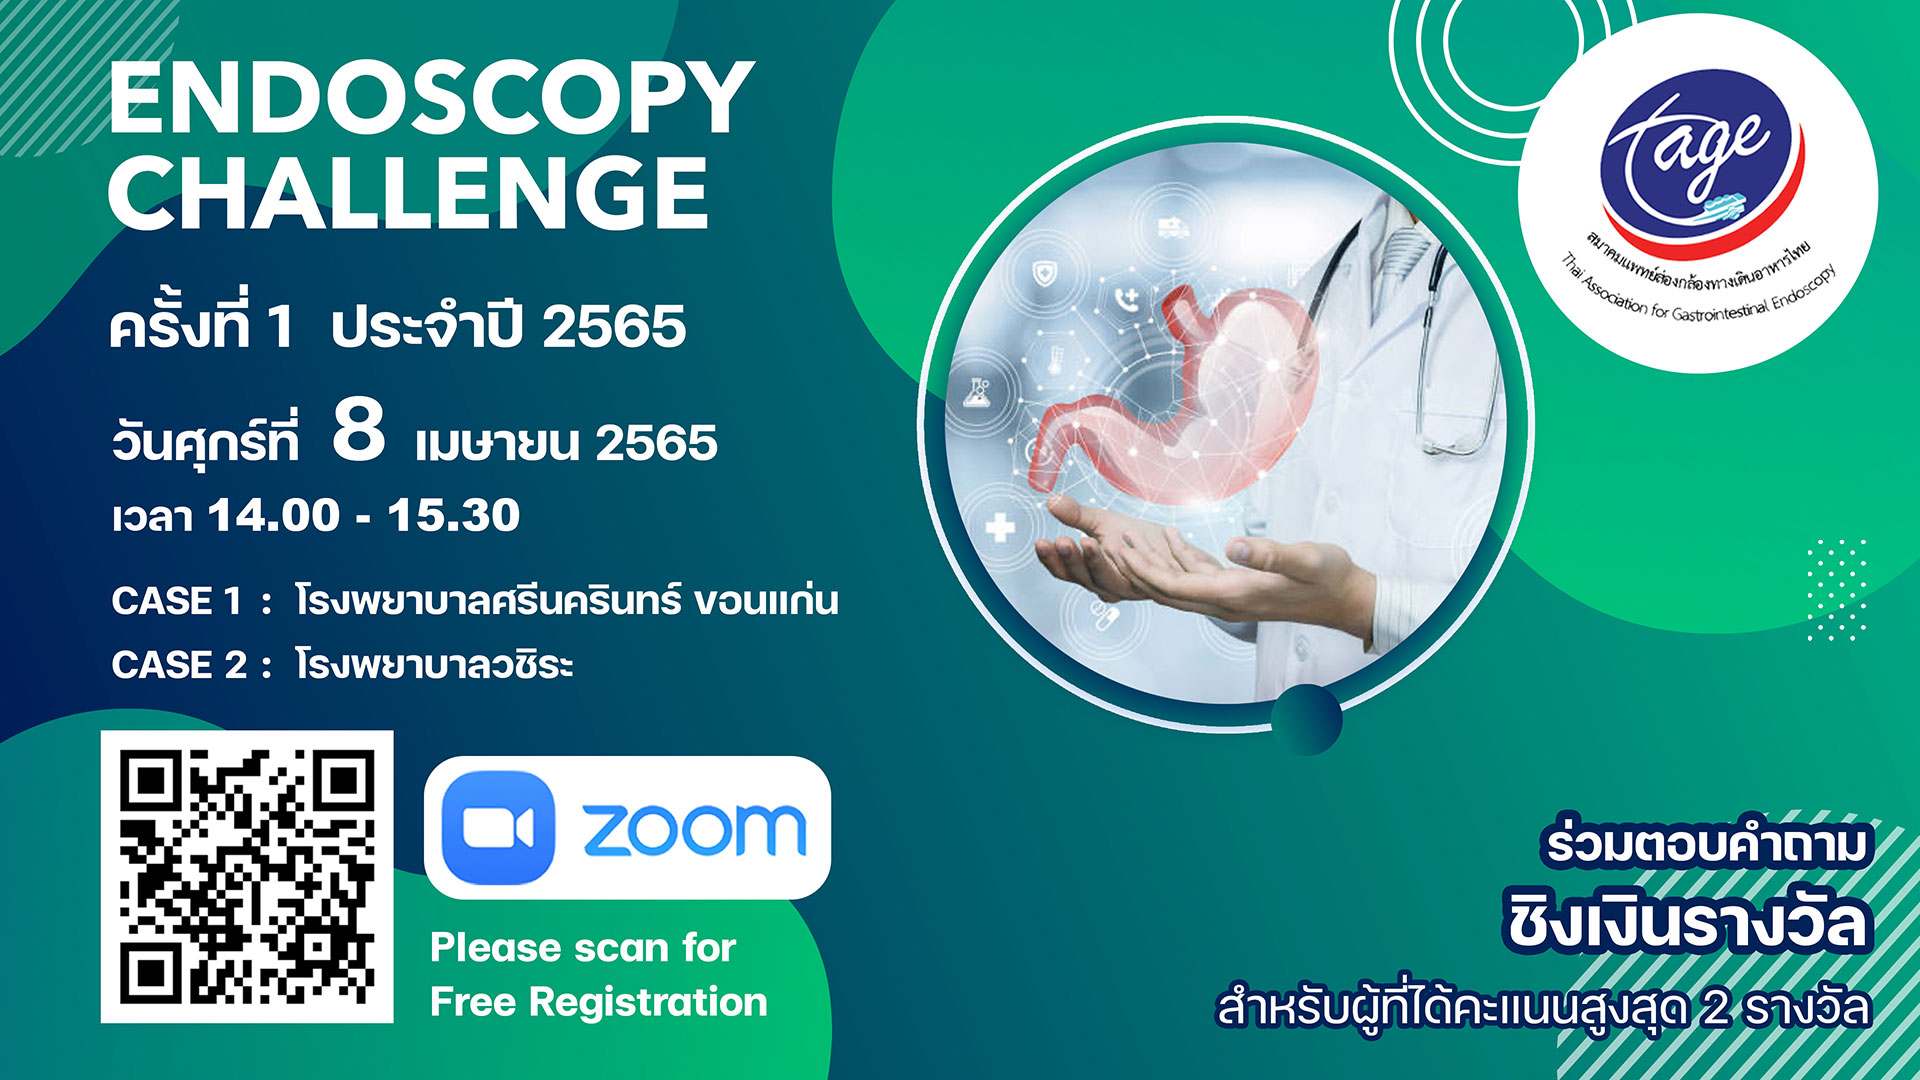 The 1st TAGE Endoscopy Challenge of 2022